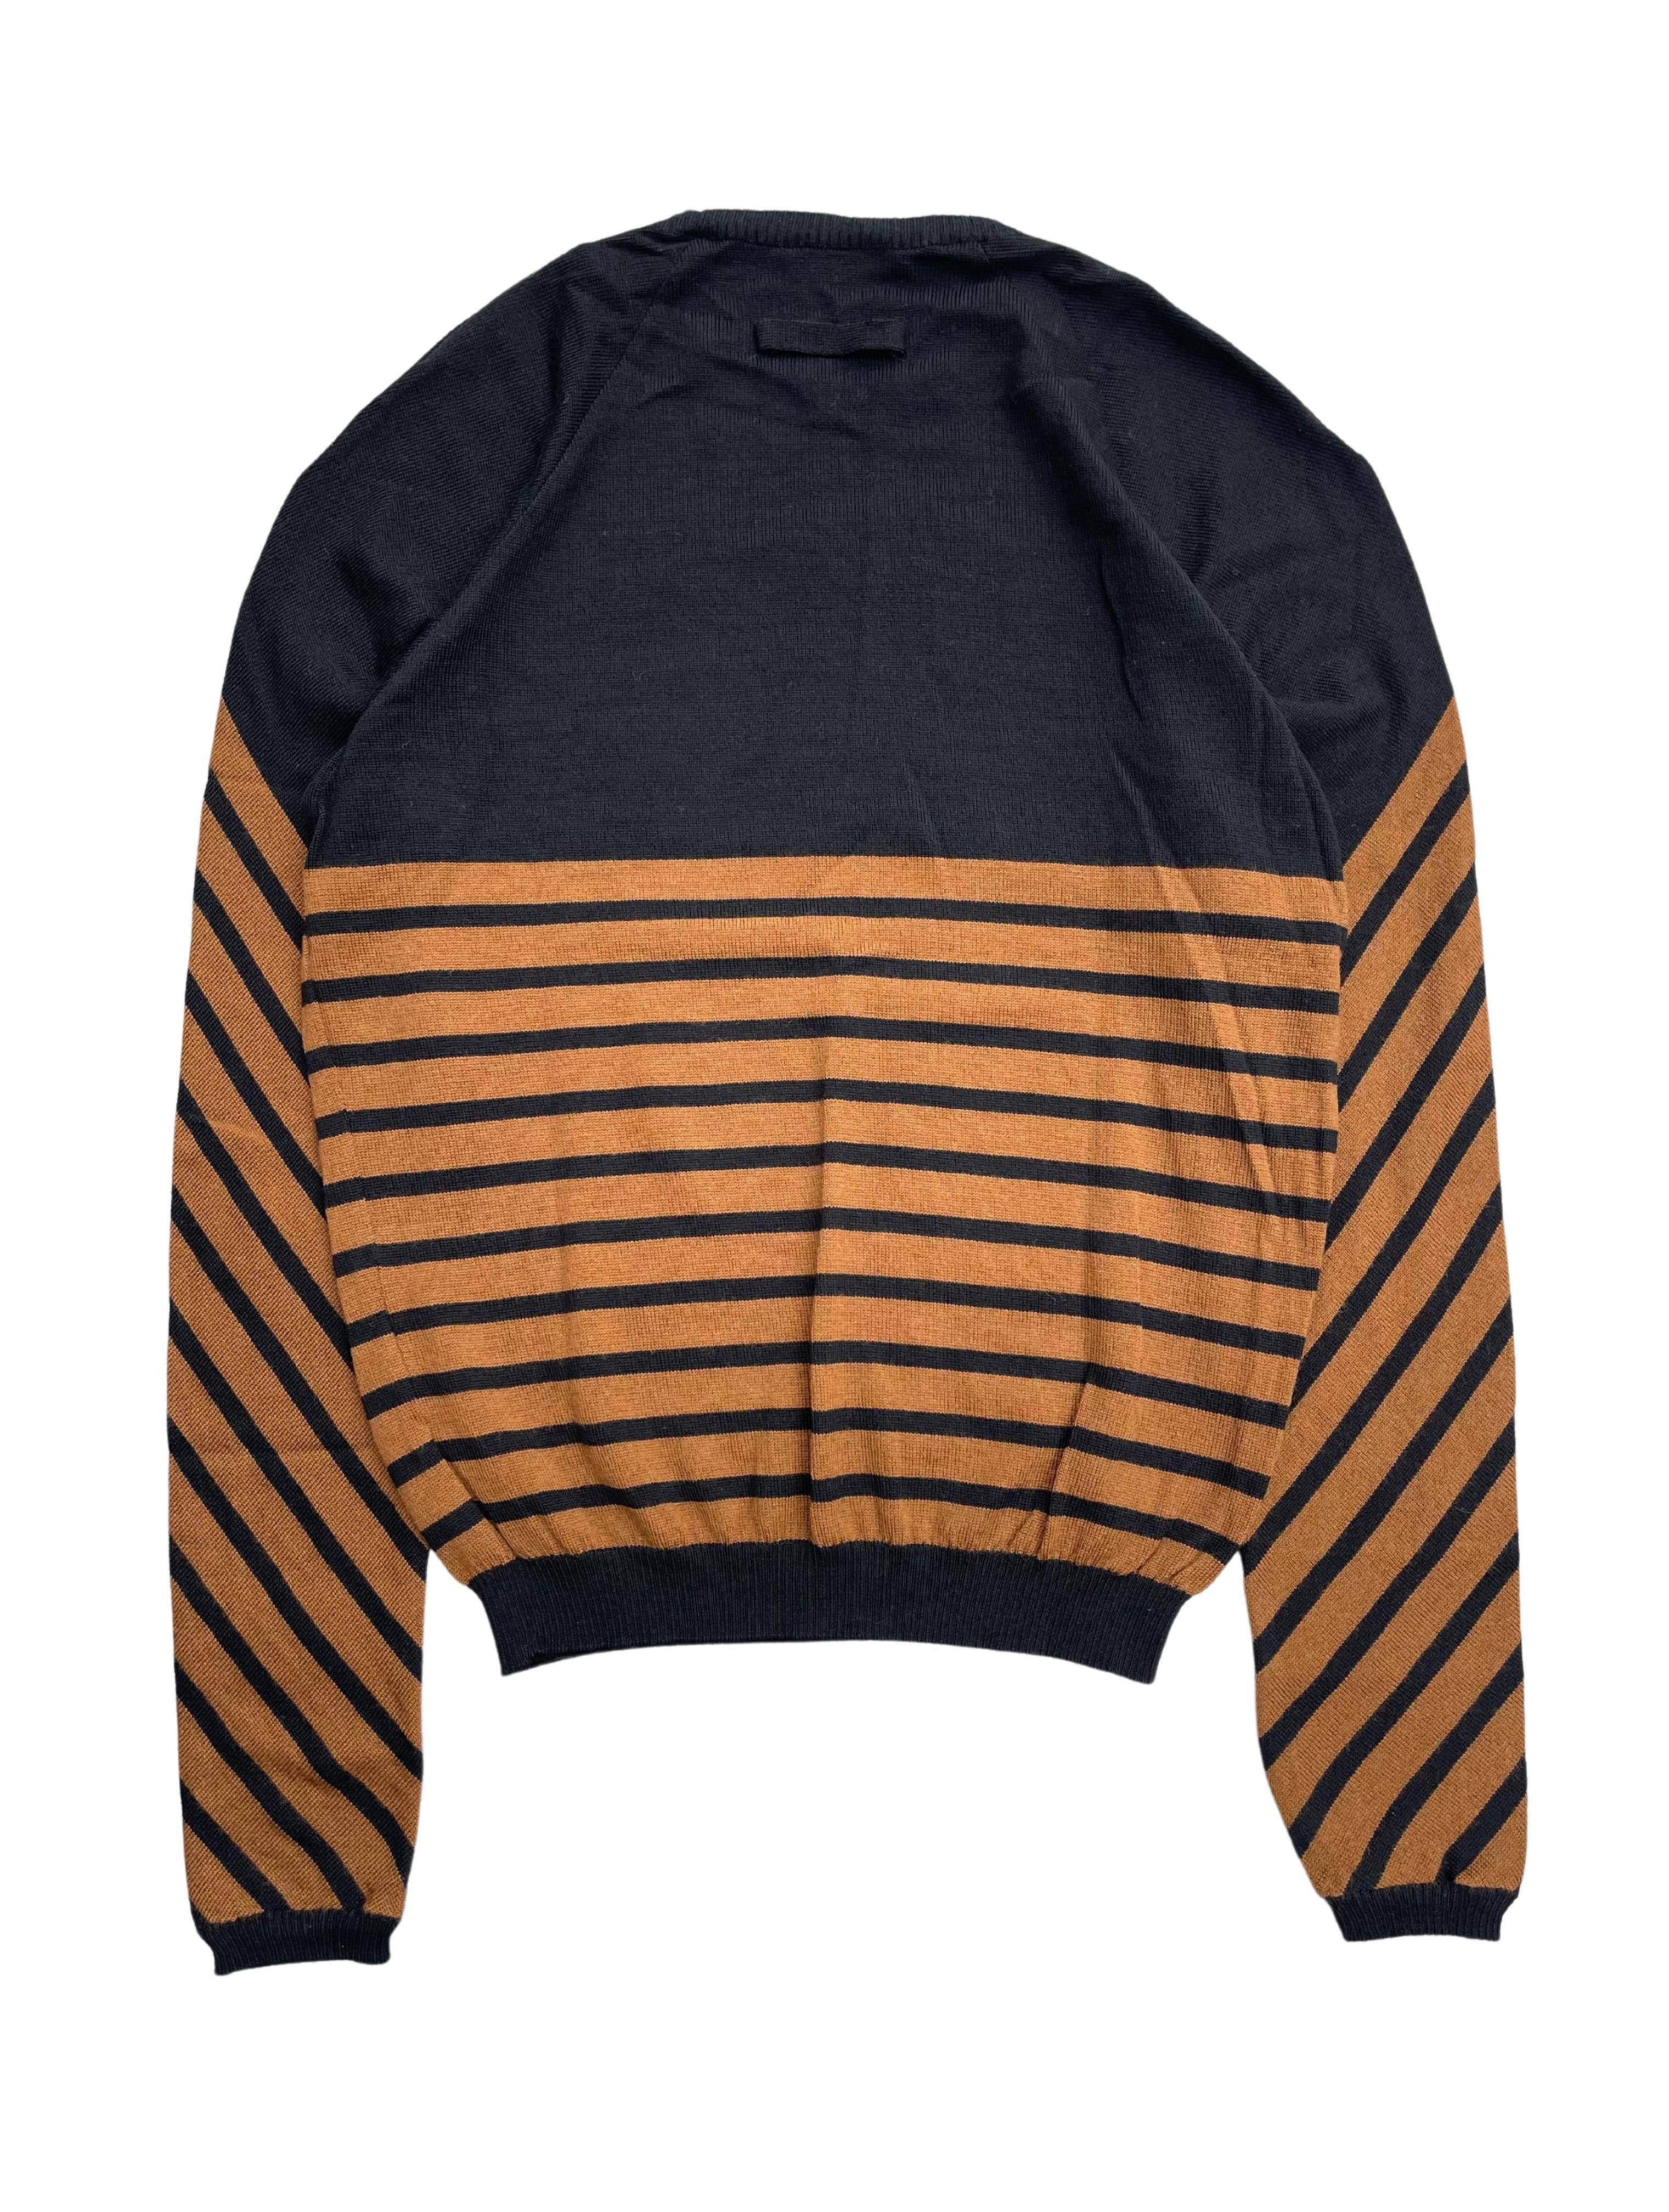 Brown Jean Paul Gaultier Maille Striped Sweater, Early 2000's